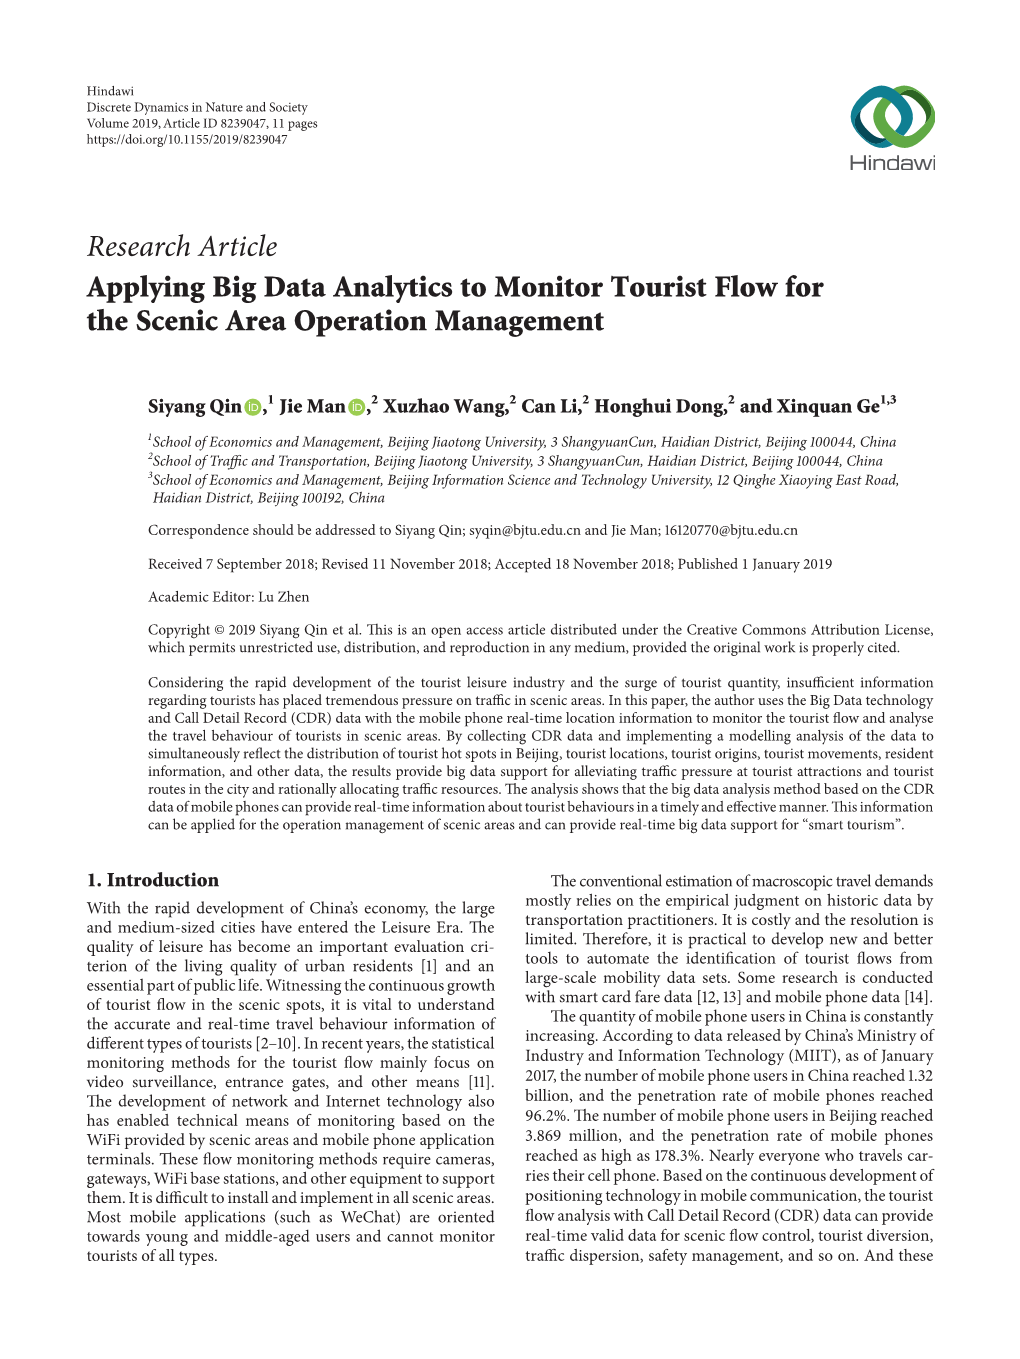 Research Article Applying Big Data Analytics to Monitor Tourist Flow for the Scenic Area Operation Management